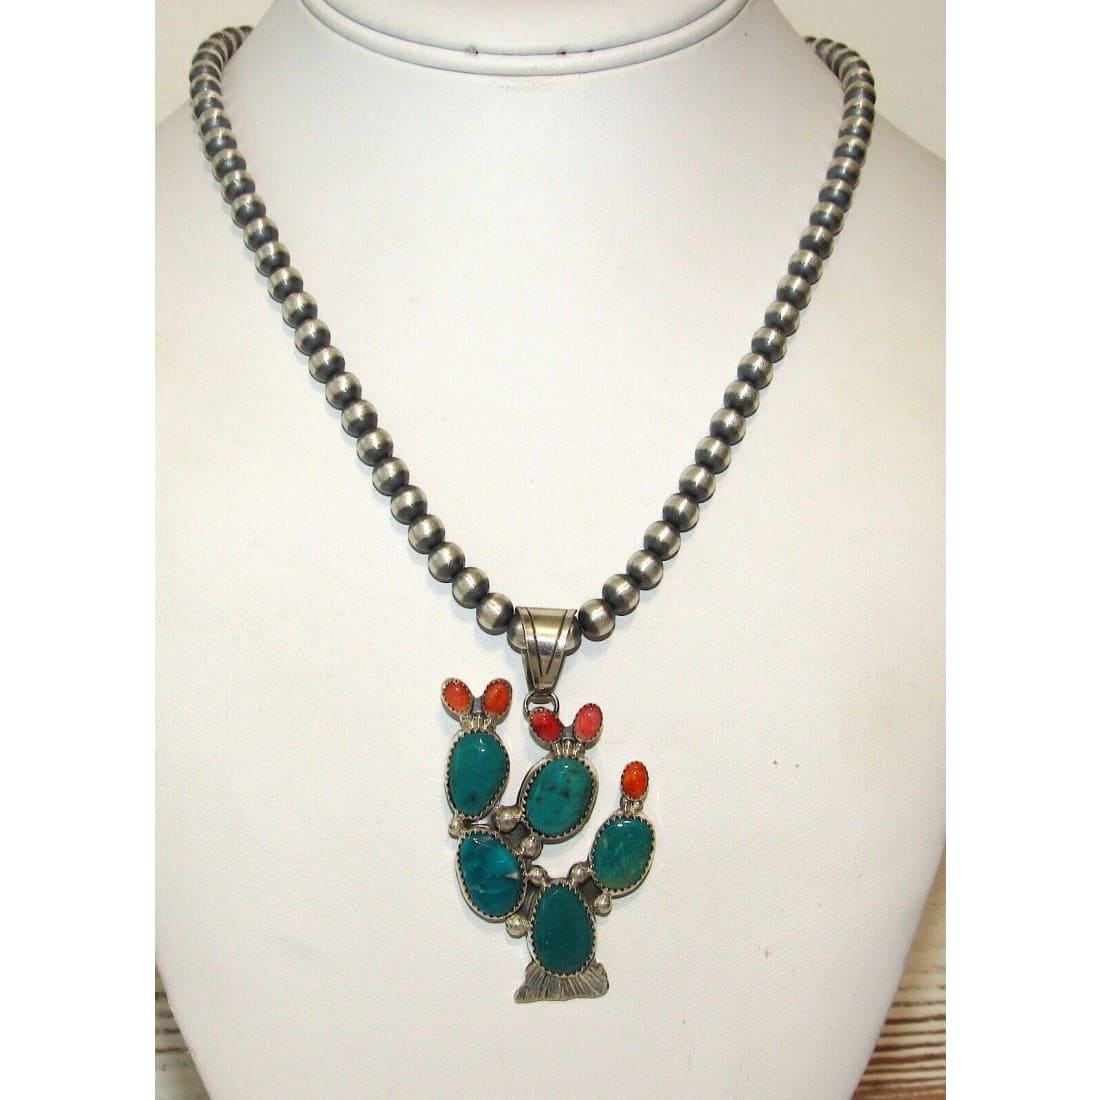 Navajo Prickly Pear Cactus Pendant Sterling Turquoise Red